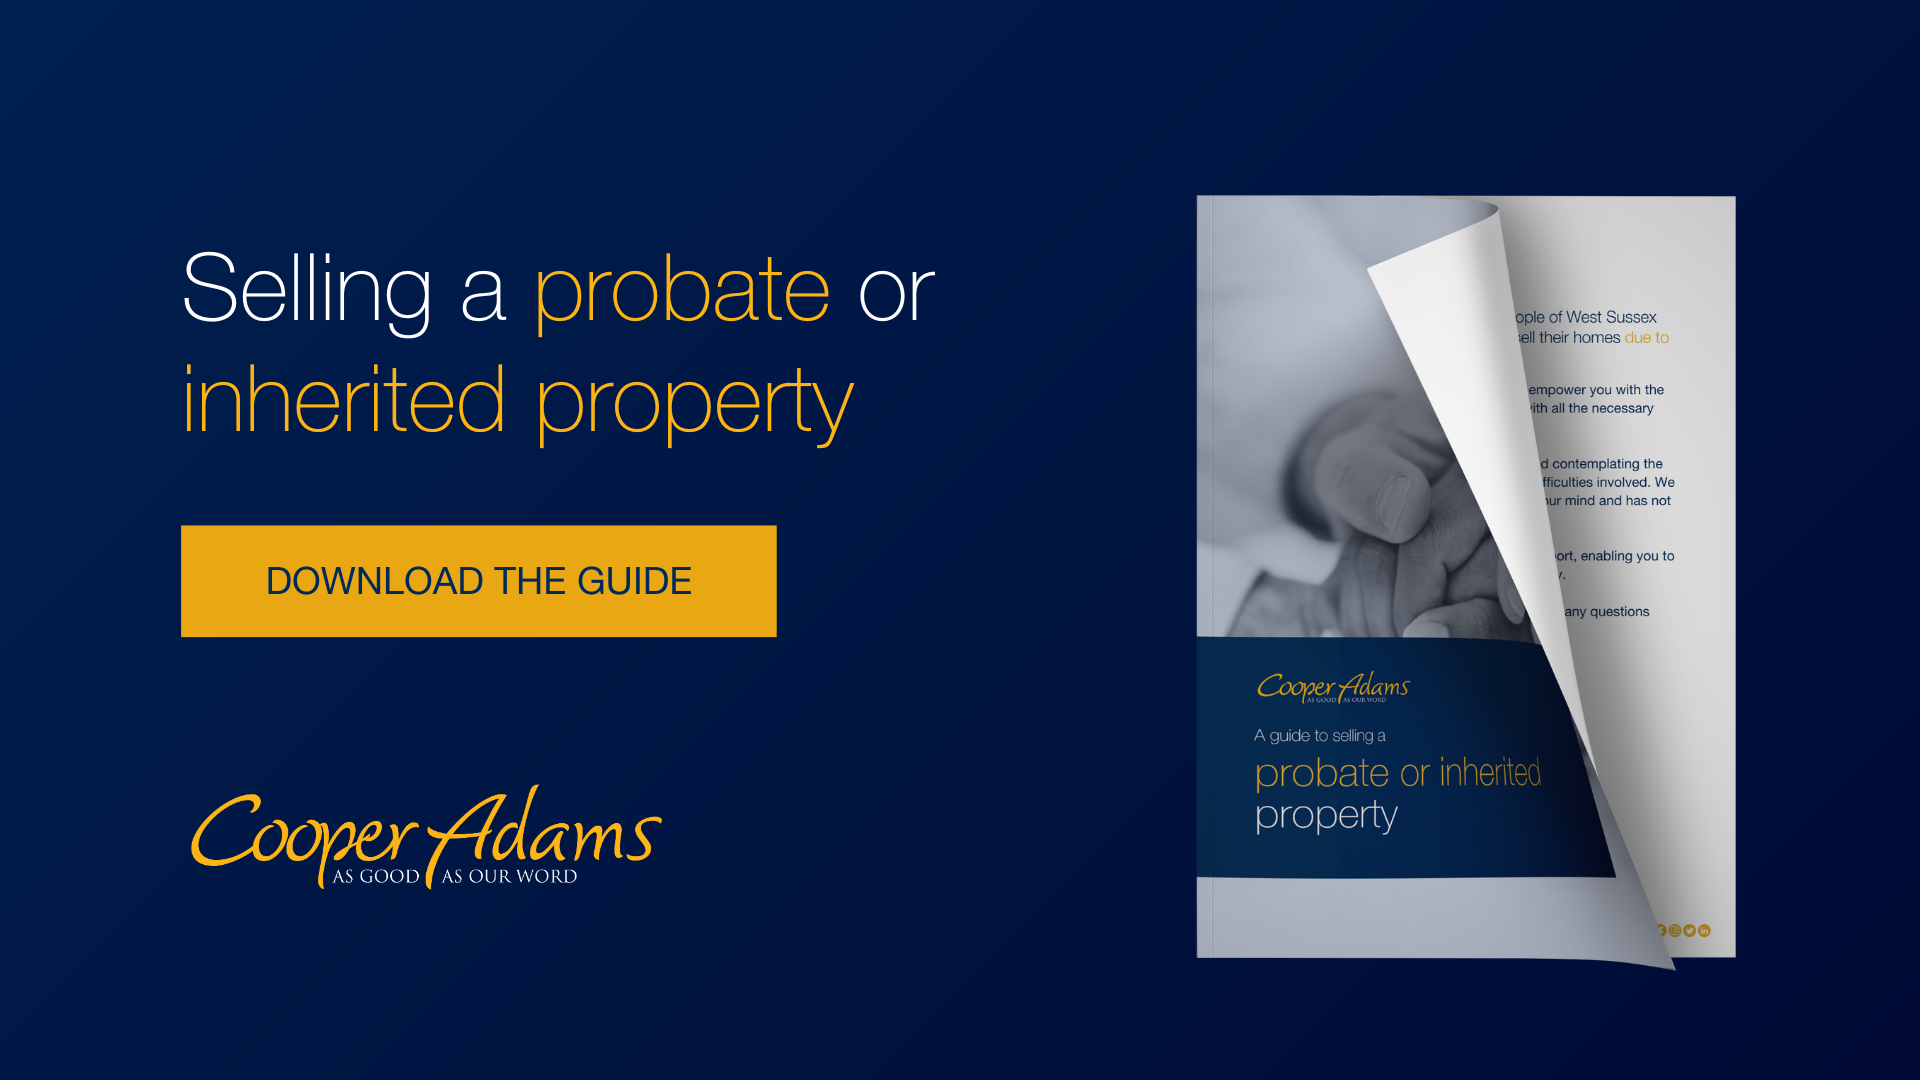 Download our guide to selling a probate or inherited property